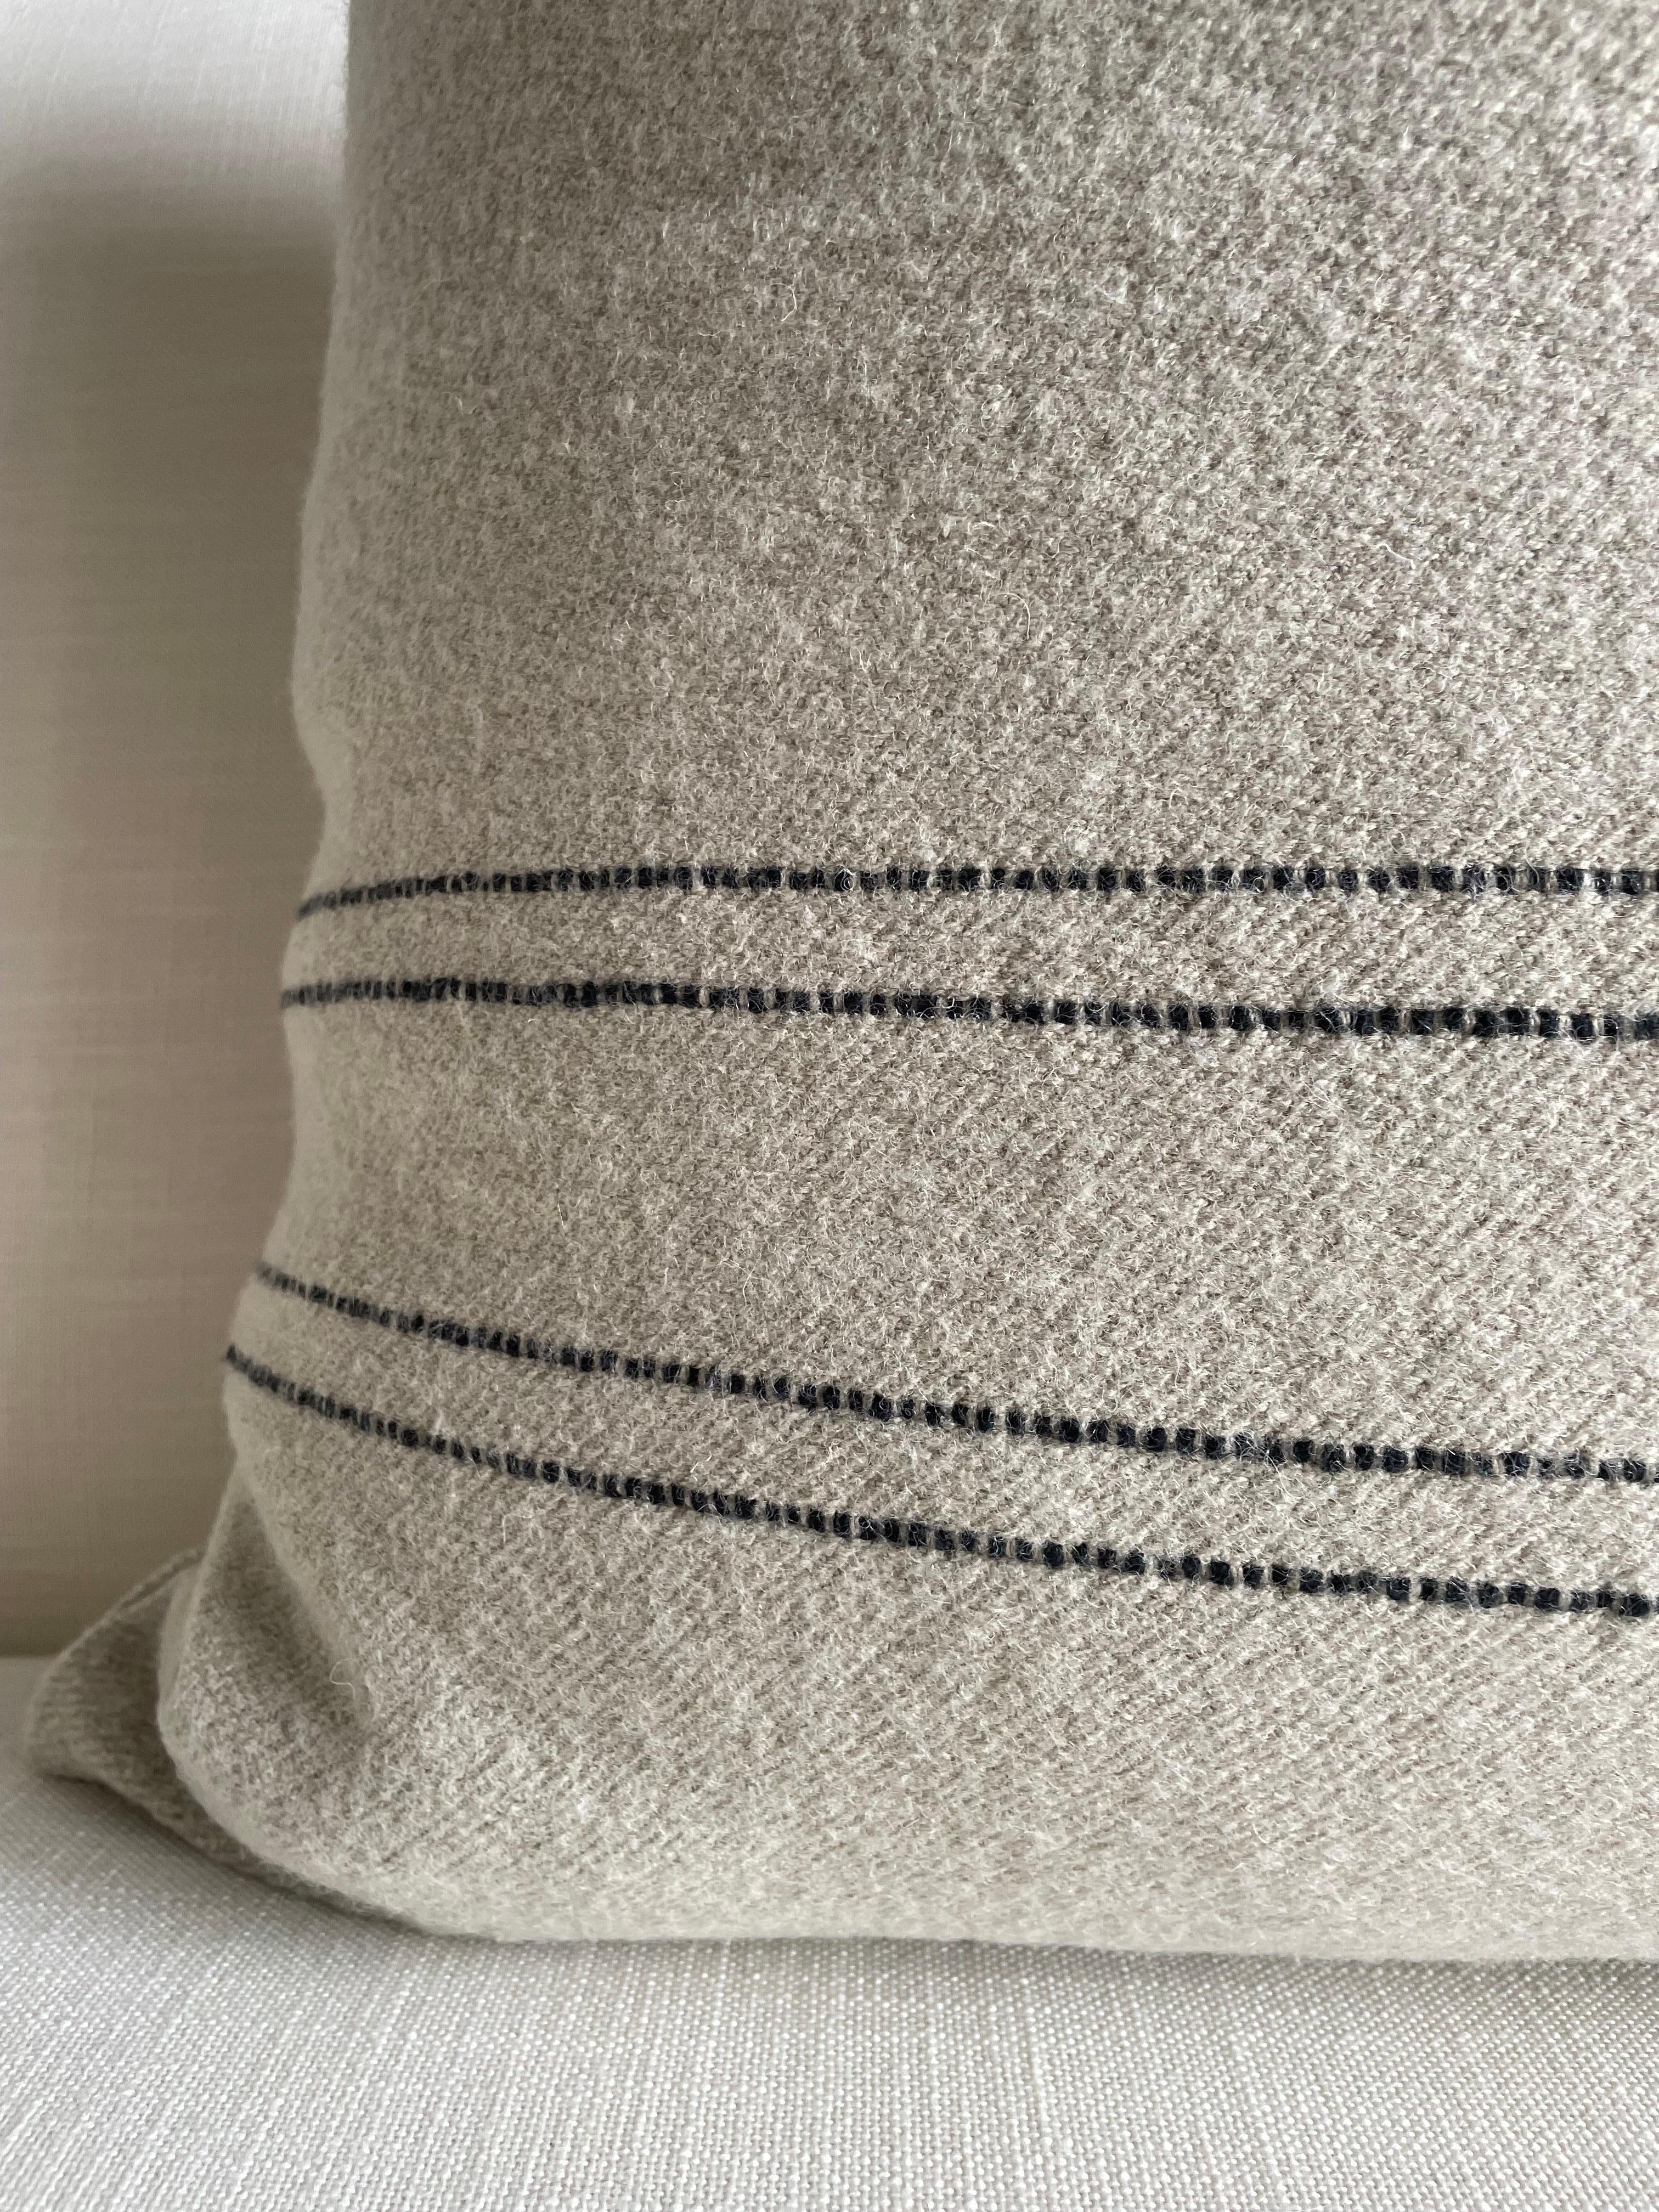 Belgian Linen and Wool Oversize Pillow Cover in Oatmeal and Coal For Sale 2